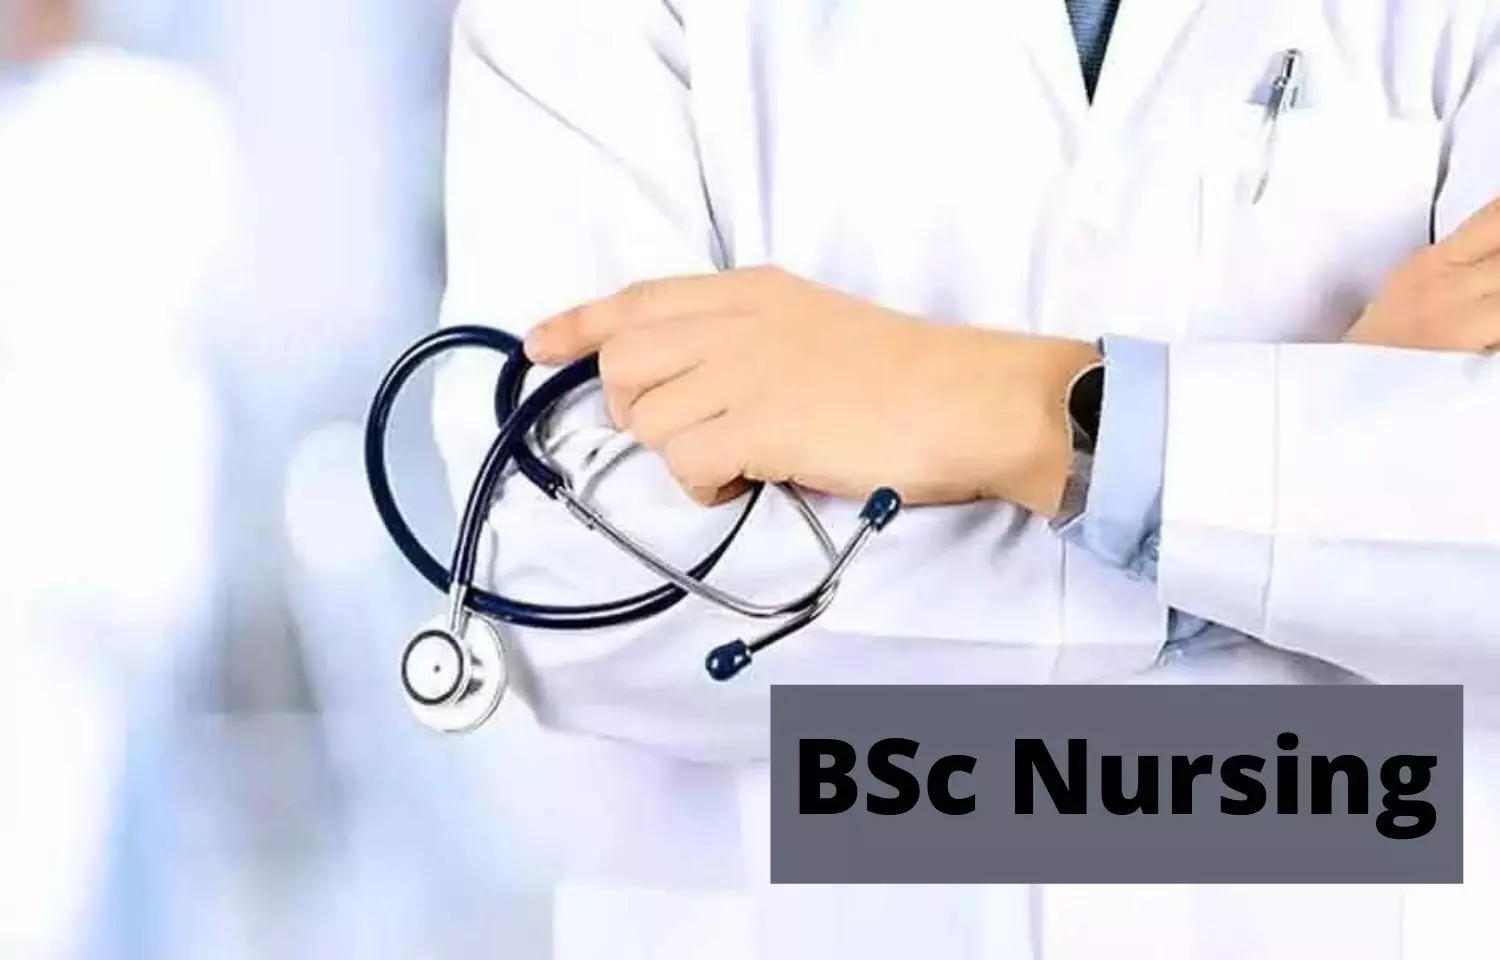 BOPEE informs on Second Round of Up-Gradation, Allotment Counselling for Post Basic BSc Nursing Courses